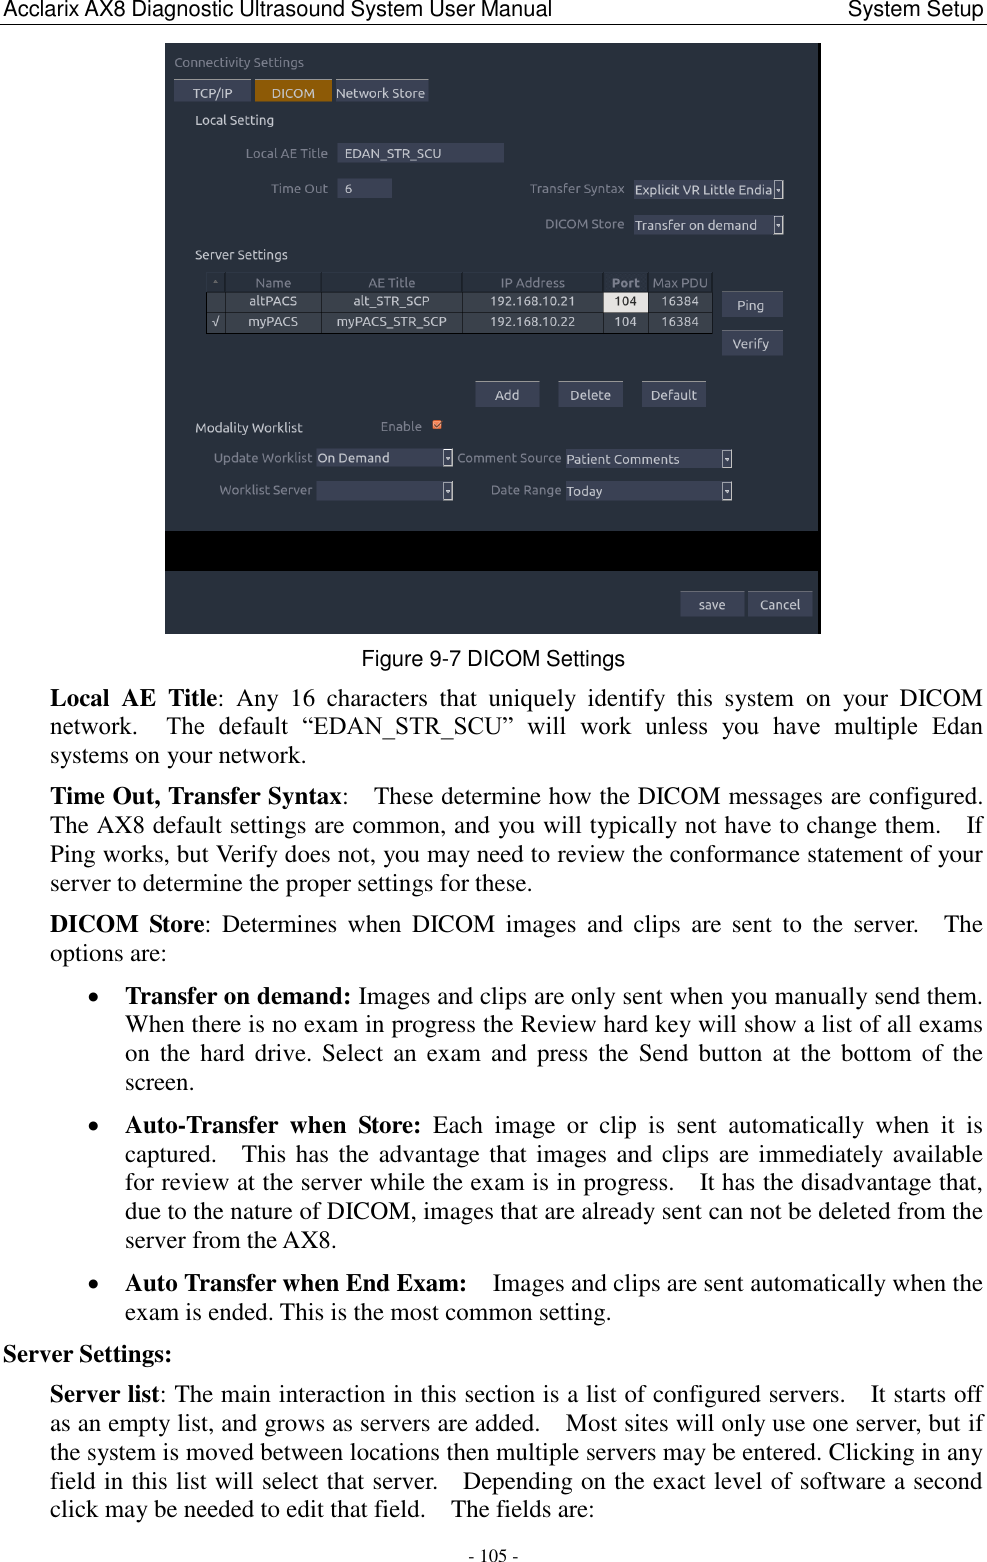 Acclarix AX8 Diagnostic Ultrasound System User Manual                                                      System Setup - 105 -  Figure 9-7 DICOM Settings Local  AE  Title:  Any  16  characters  that  uniquely  identify  this  system  on  your  DICOM network.    The  default  “EDAN_STR_SCU”  will  work  unless  you  have  multiple  Edan systems on your network.     Time Out, Transfer Syntax:    These determine how the DICOM messages are configured.   The AX8 default settings are common, and you will typically not have to change them.    If Ping works, but Verify does not, you may need to review the conformance statement of your server to determine the proper settings for these. DICOM  Store:  Determines  when  DICOM  images  and  clips  are  sent  to  the  server.    The options are:  Transfer on demand: Images and clips are only sent when you manually send them.   When there is no exam in progress the Review hard key will show a list of all exams on the  hard  drive.  Select  an exam and  press the  Send  button  at  the  bottom of  the screen.    Auto-Transfer  when  Store:  Each  image  or  clip  is  sent  automatically  when  it  is captured.    This has the advantage that images and clips are immediately available for review at the server while the exam is in progress.    It has the disadvantage that, due to the nature of DICOM, images that are already sent can not be deleted from the server from the AX8.  Auto Transfer when End Exam:    Images and clips are sent automatically when the exam is ended. This is the most common setting. Server Settings:   Server list: The main interaction in this section is a list of configured servers.    It starts off as an empty list, and grows as servers are added.    Most sites will only use one server, but if the system is moved between locations then multiple servers may be entered. Clicking in any field in this list will select that server.    Depending on the exact level of software a second click may be needed to edit that field.    The fields are: 